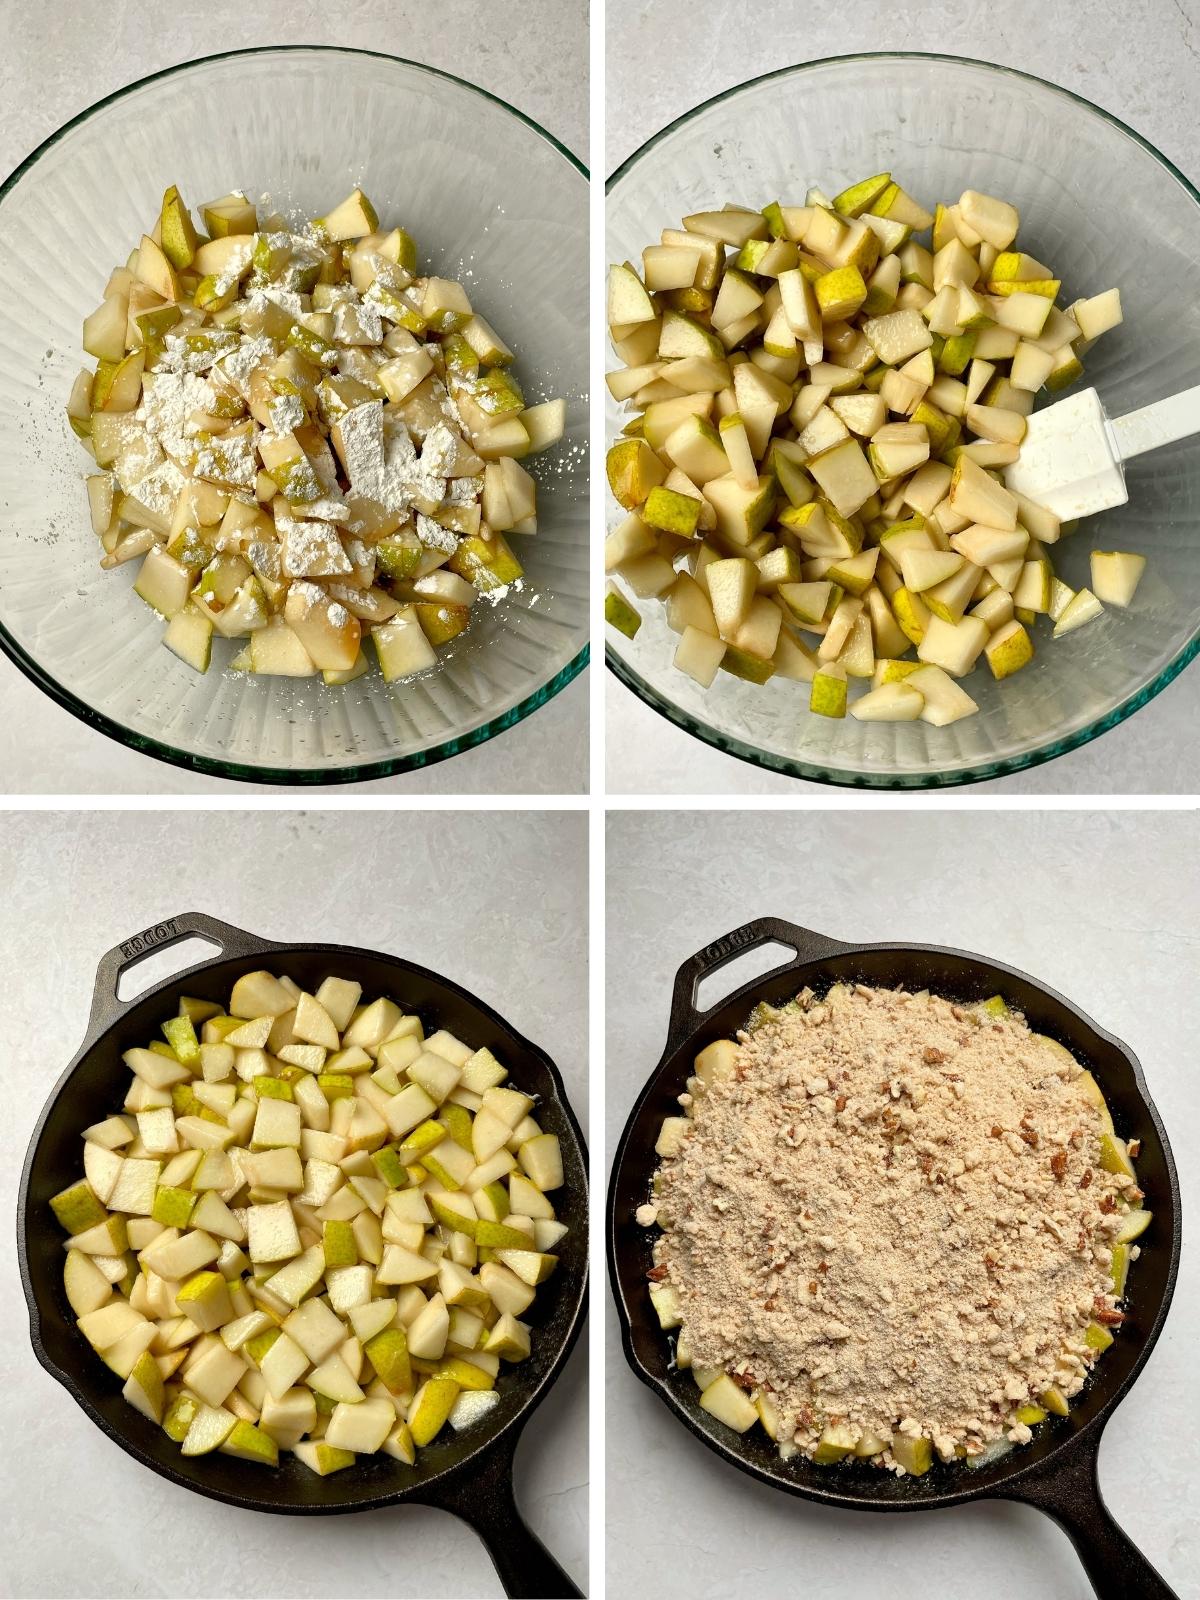 Process steps for the pear filling.